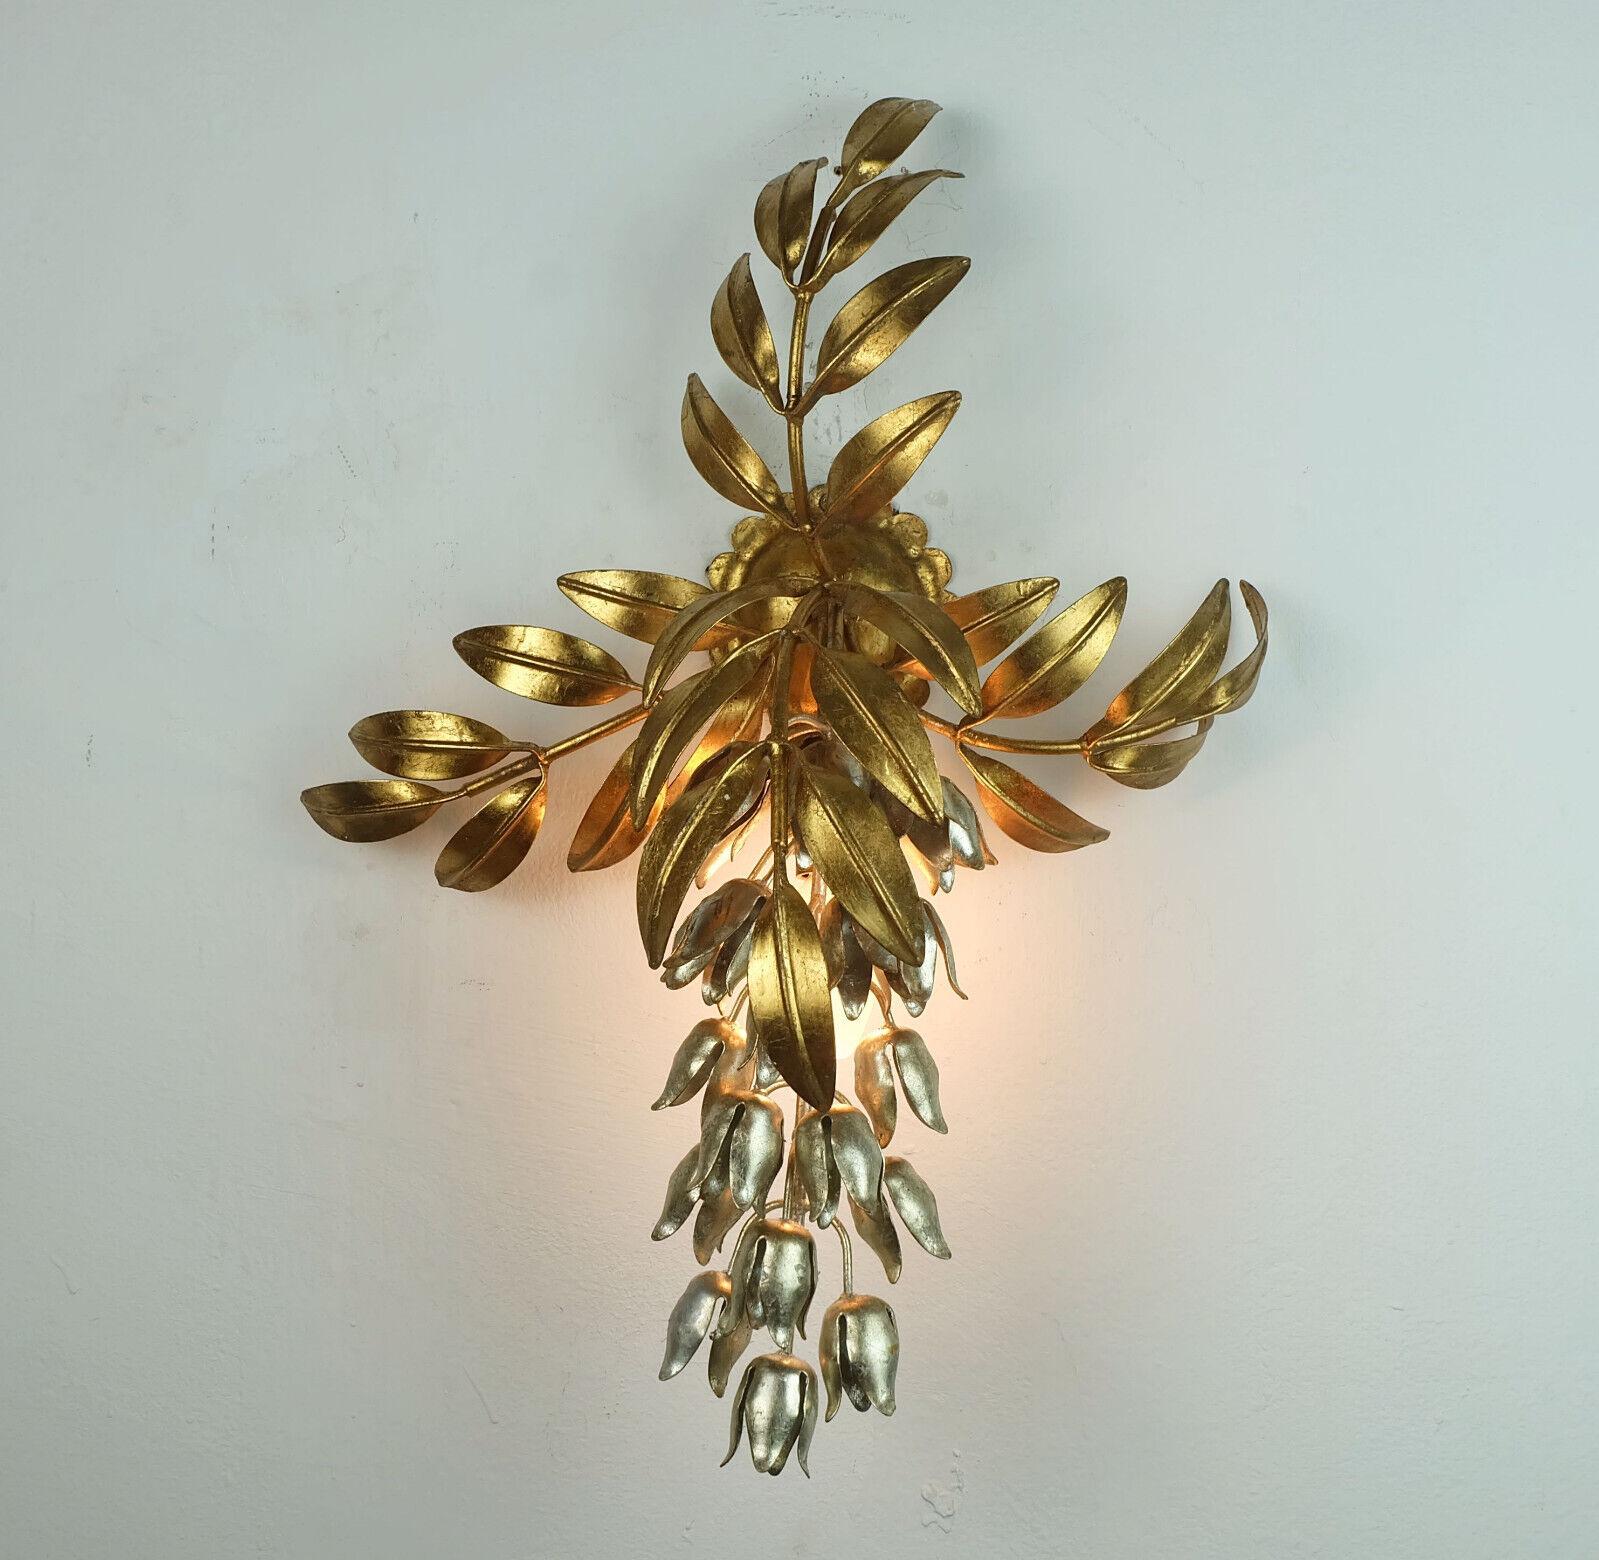 hans koegl vintage florentine WALL LAMP sconce metal pioggia d'oro hollywood reg In Good Condition For Sale In Mannheim, DE